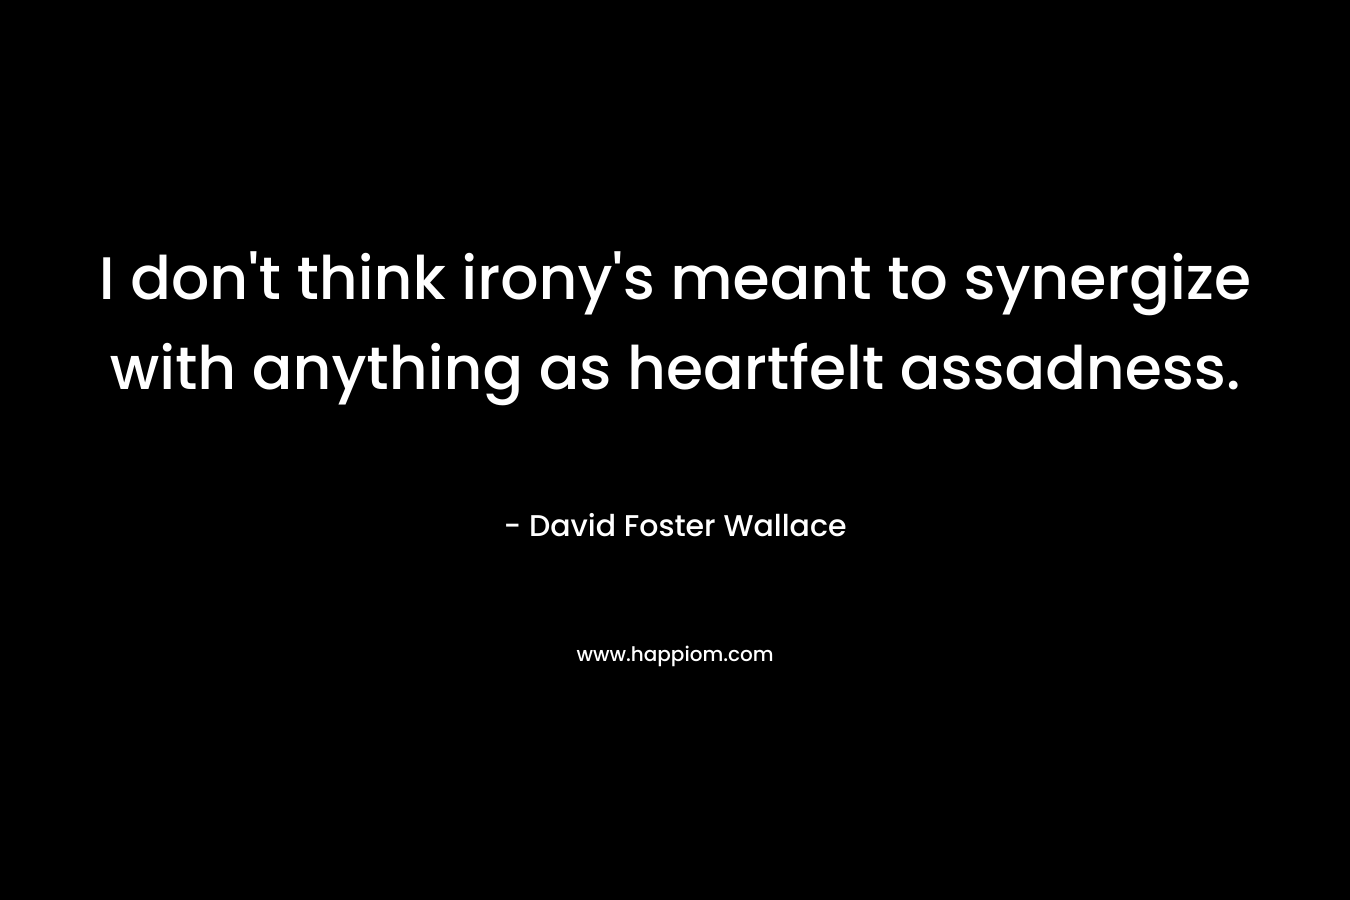 I don't think irony's meant to synergize with anything as heartfelt assadness.